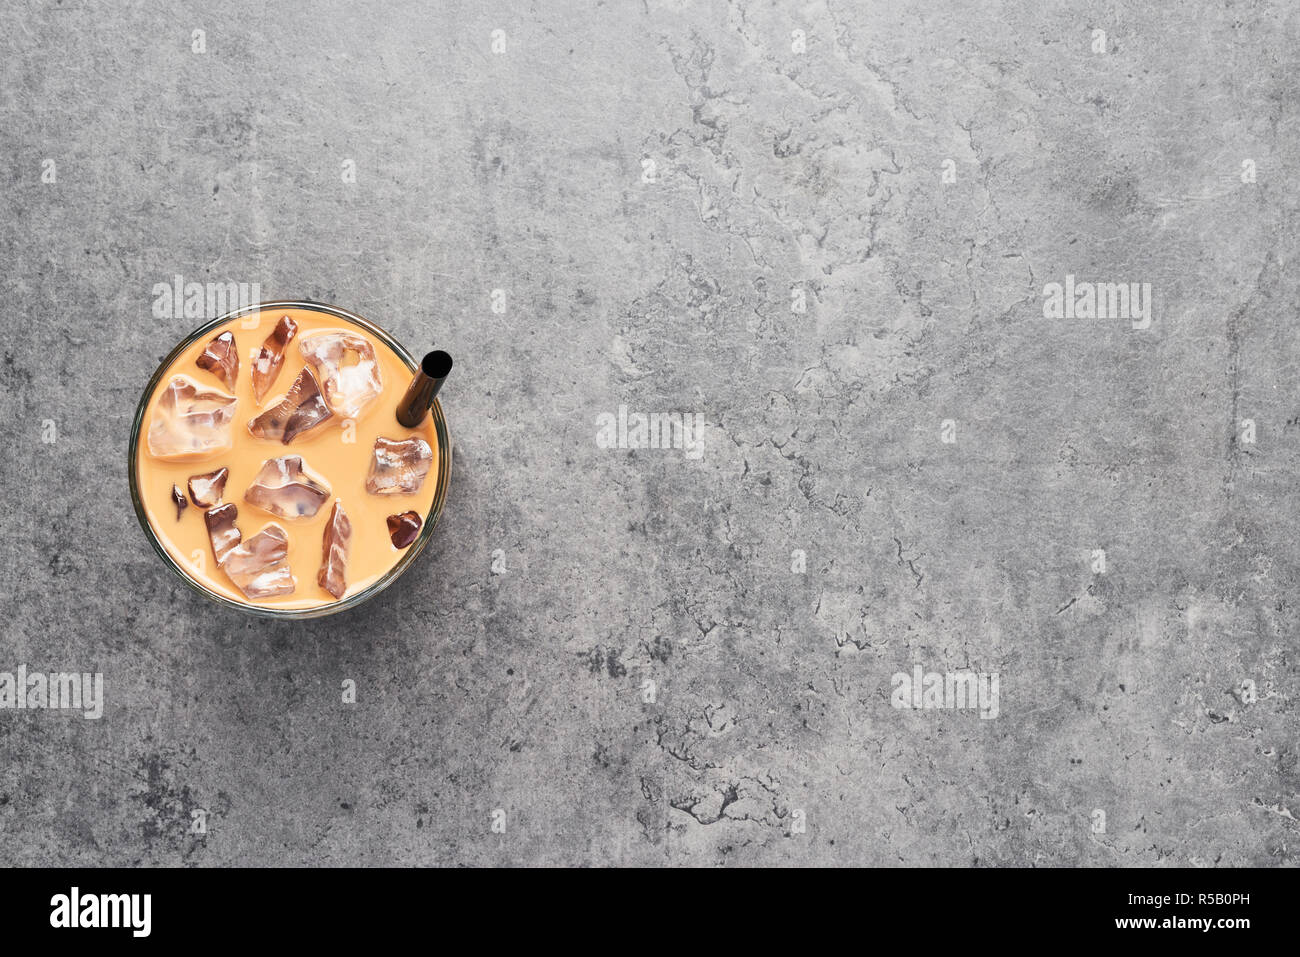 Chocolate, vanilla, caramel or cinnamon iced coffee in tall glass with black straw on grey concrete background. Top view with copy space for text. Stock Photo